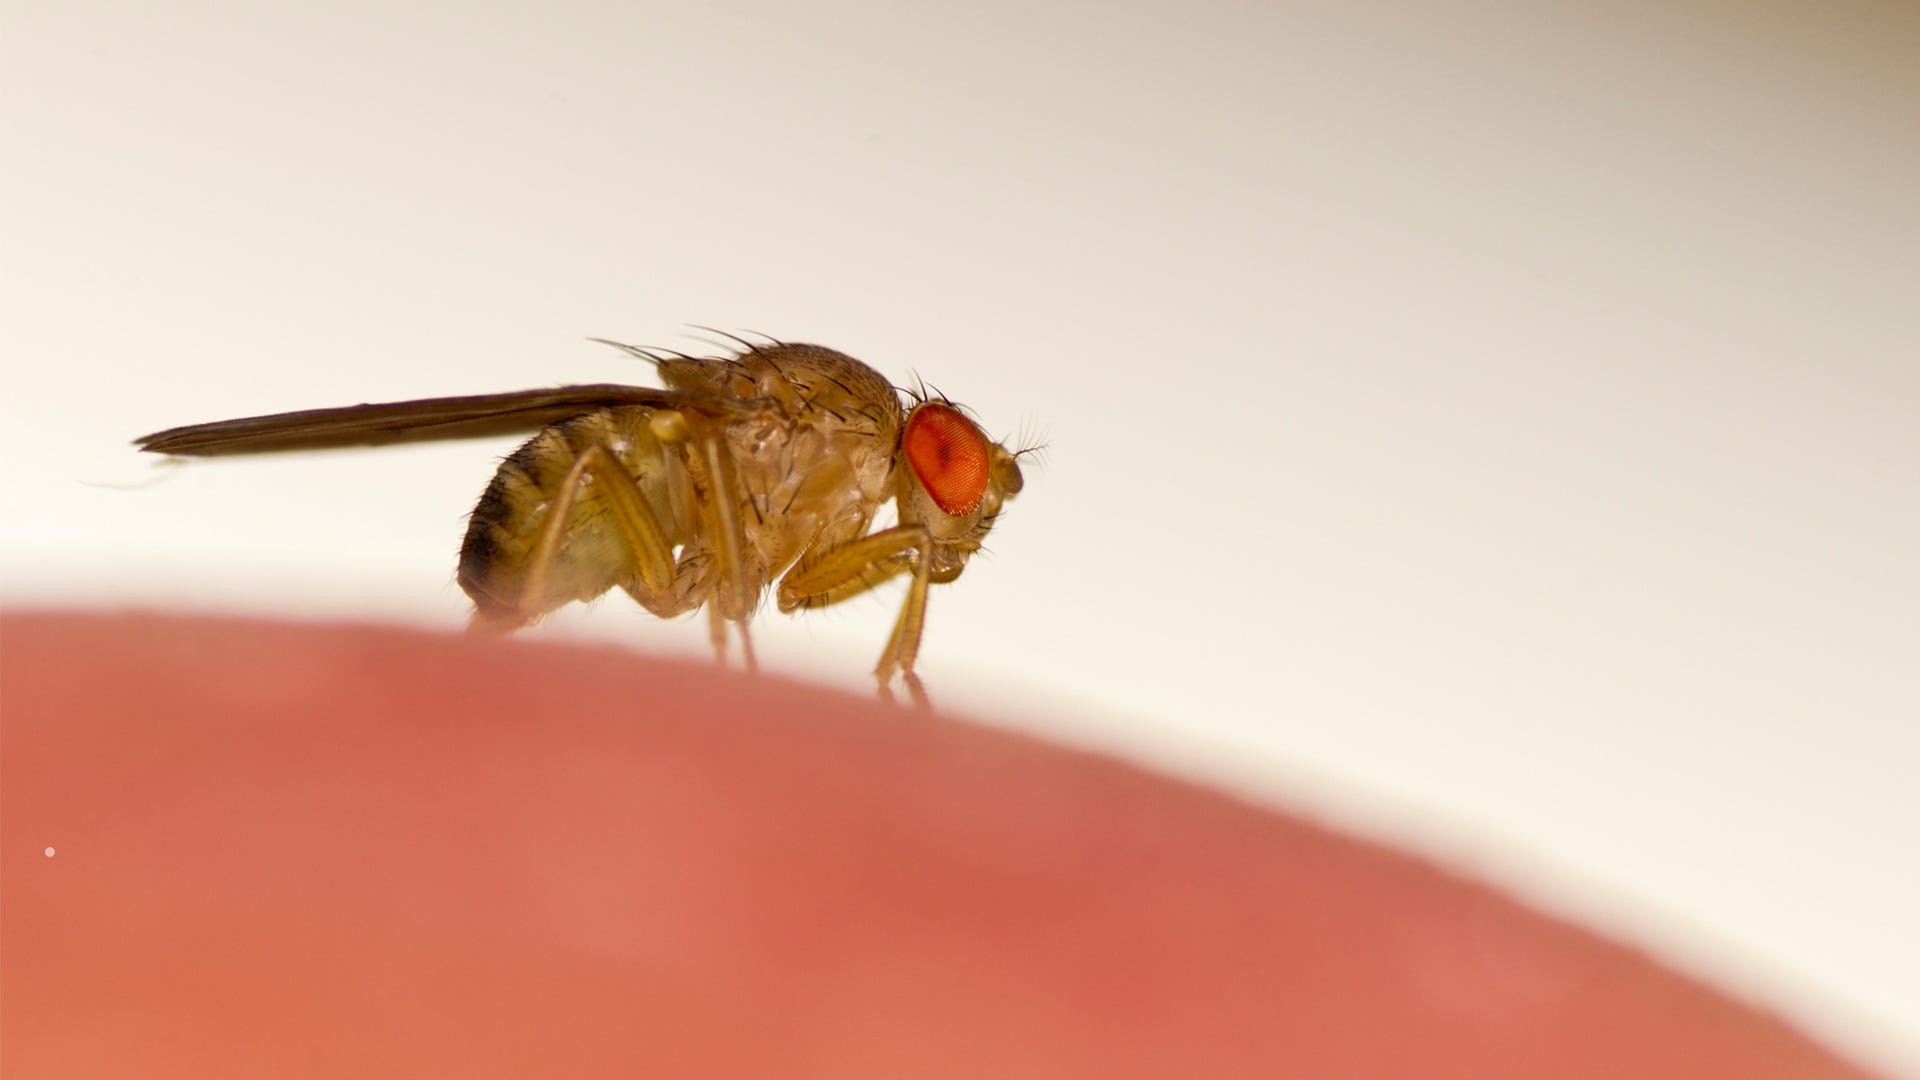 How to ID Fruit Flies, Drain Flies and Fungus Gnats